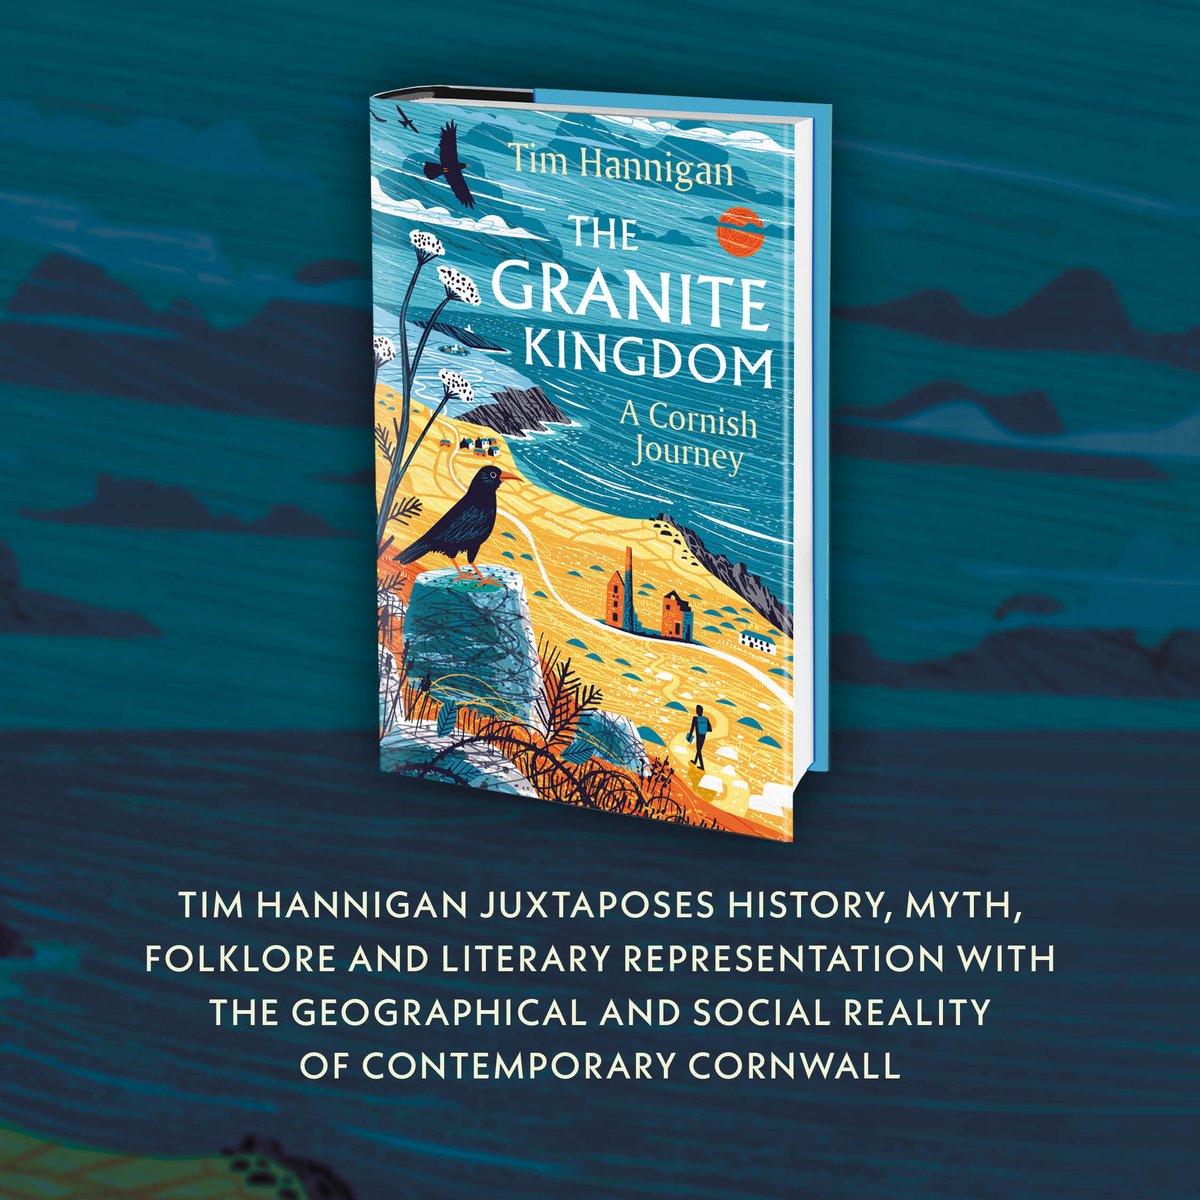 It's publication day for #TheGraniteKingdom by @Tim_Hannigan 🏖️ 

A fascinating, lyrical account of an east-west walk across Britain's westernmost and most mysterious region...

 amzn.to/3Hxi54a